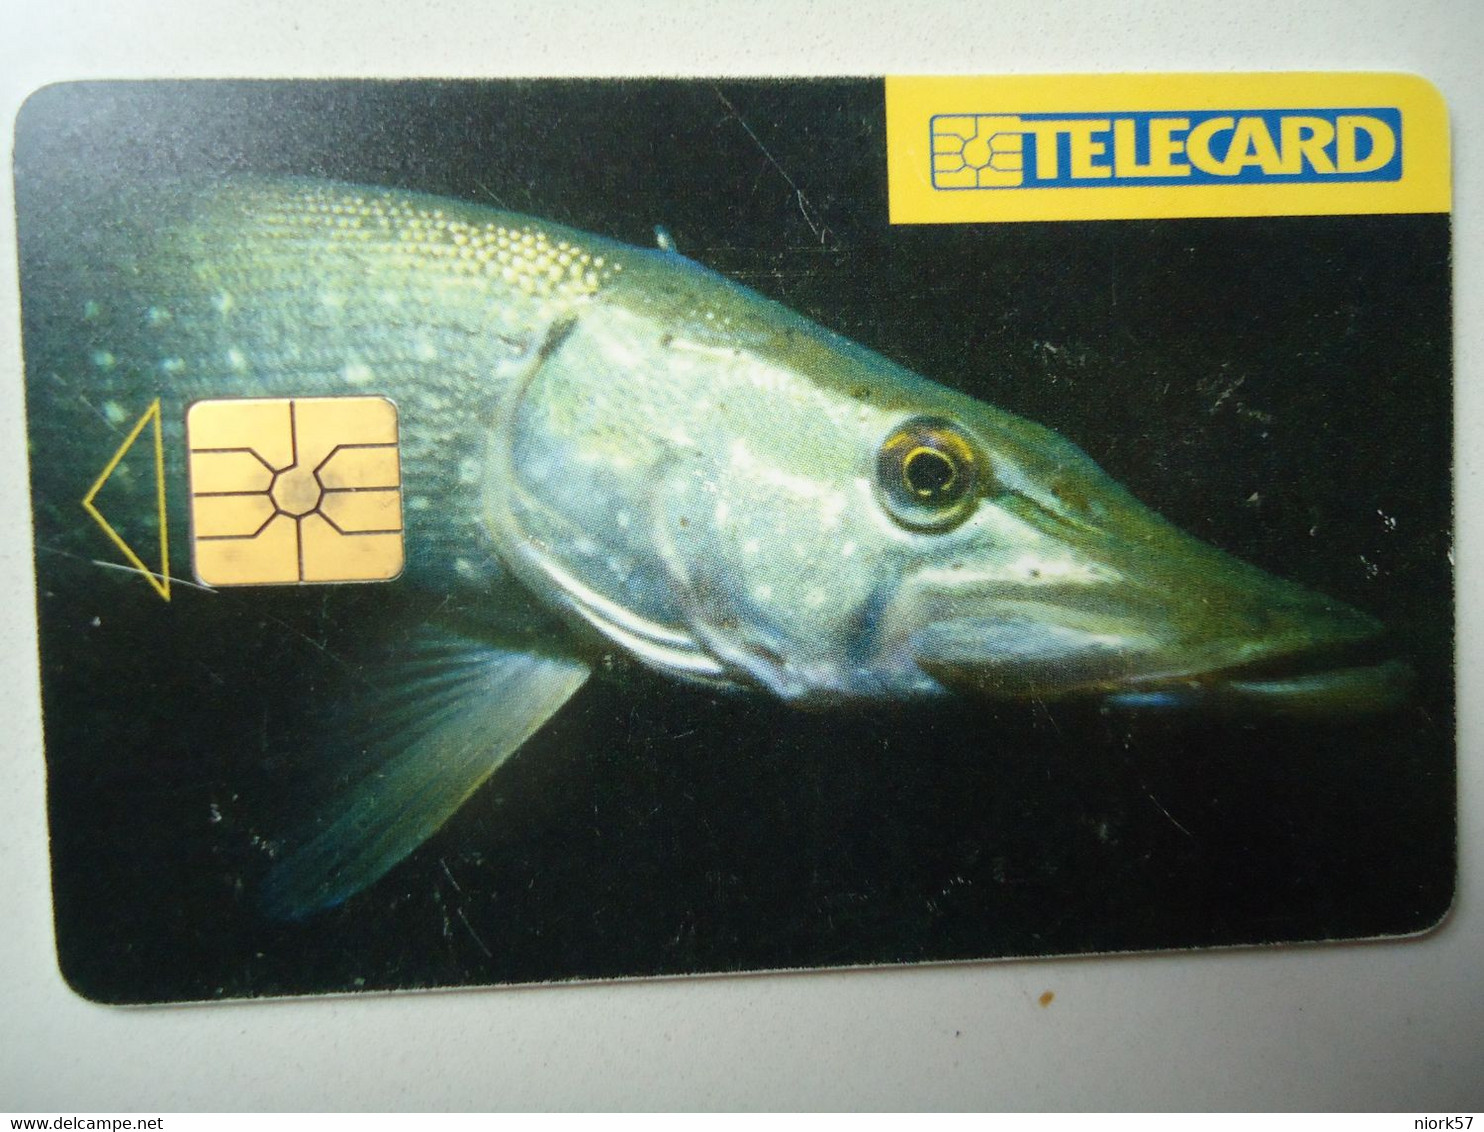 CZECH REPUBLIC USED PHONECARDS FISH FISHES - Peces